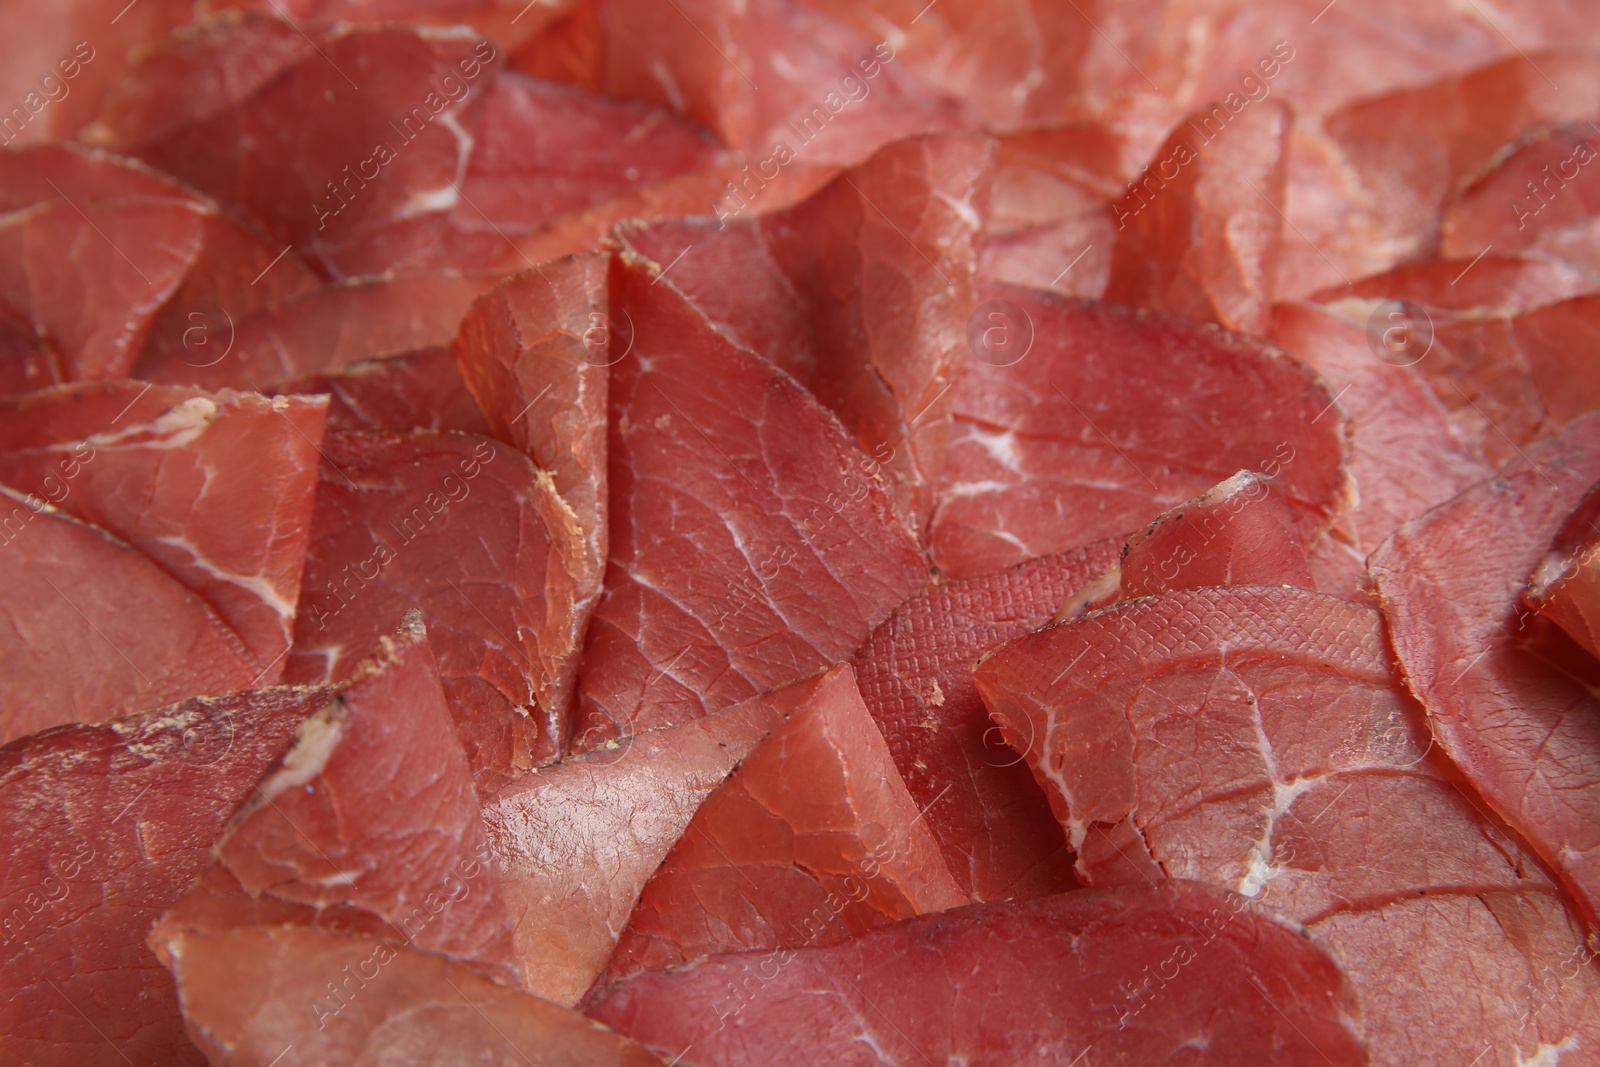 Photo of Slices of tasty bresaola as background, closeup